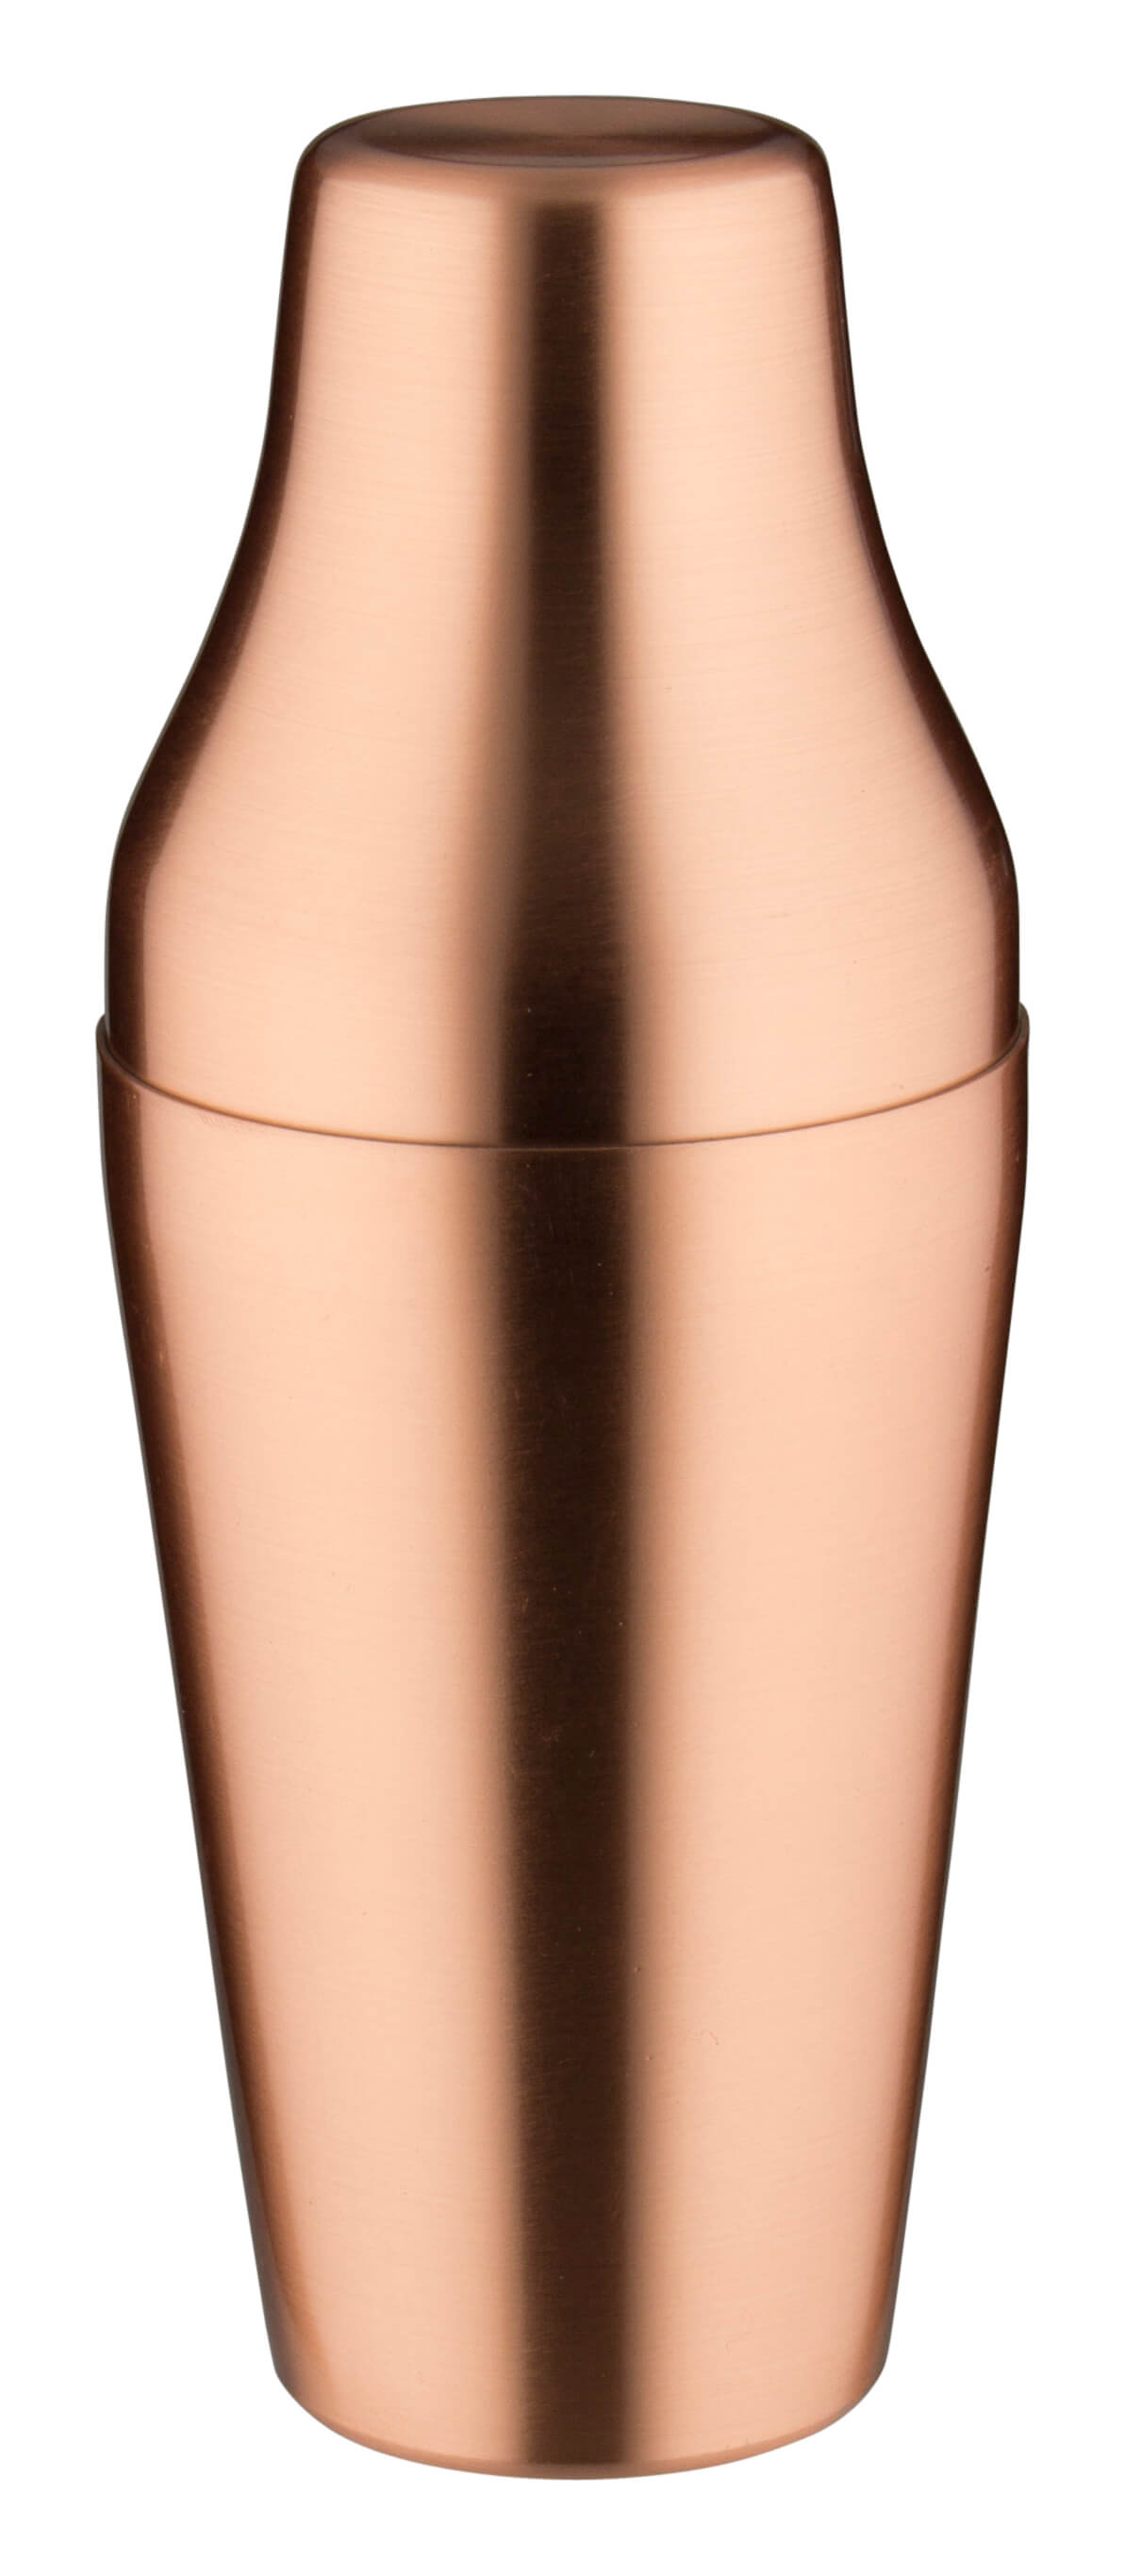 French Cocktail Shaker, copper colored matt, two parts (500ml)